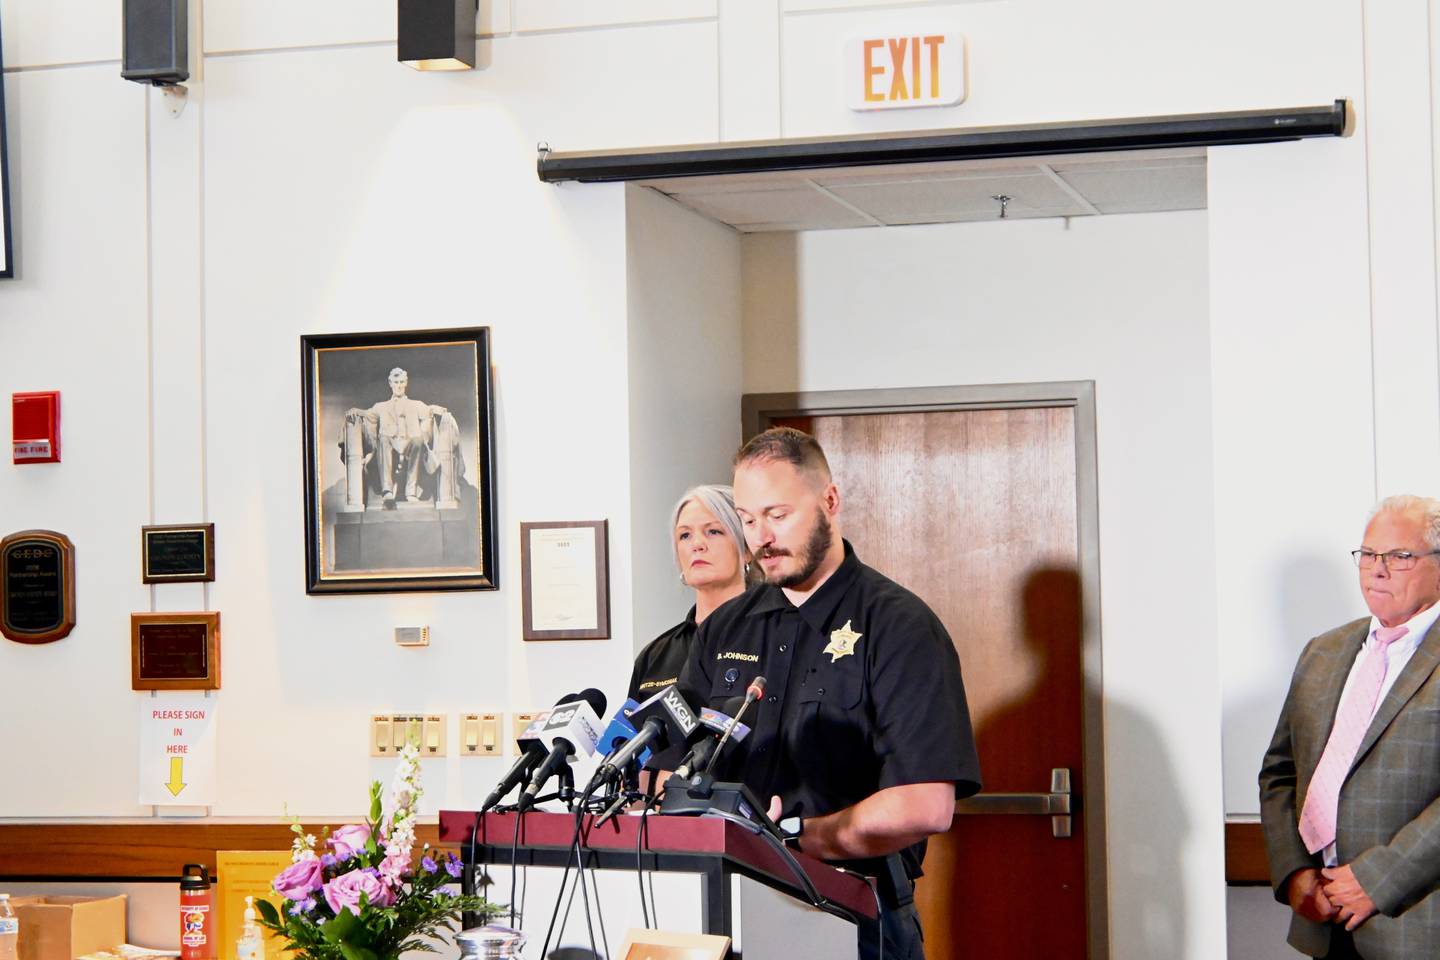 Deputy Chief Corner Brandon Johnson speaks during Thursday's press conference about how he was able to identify JoAnn "Vicky" Smith.